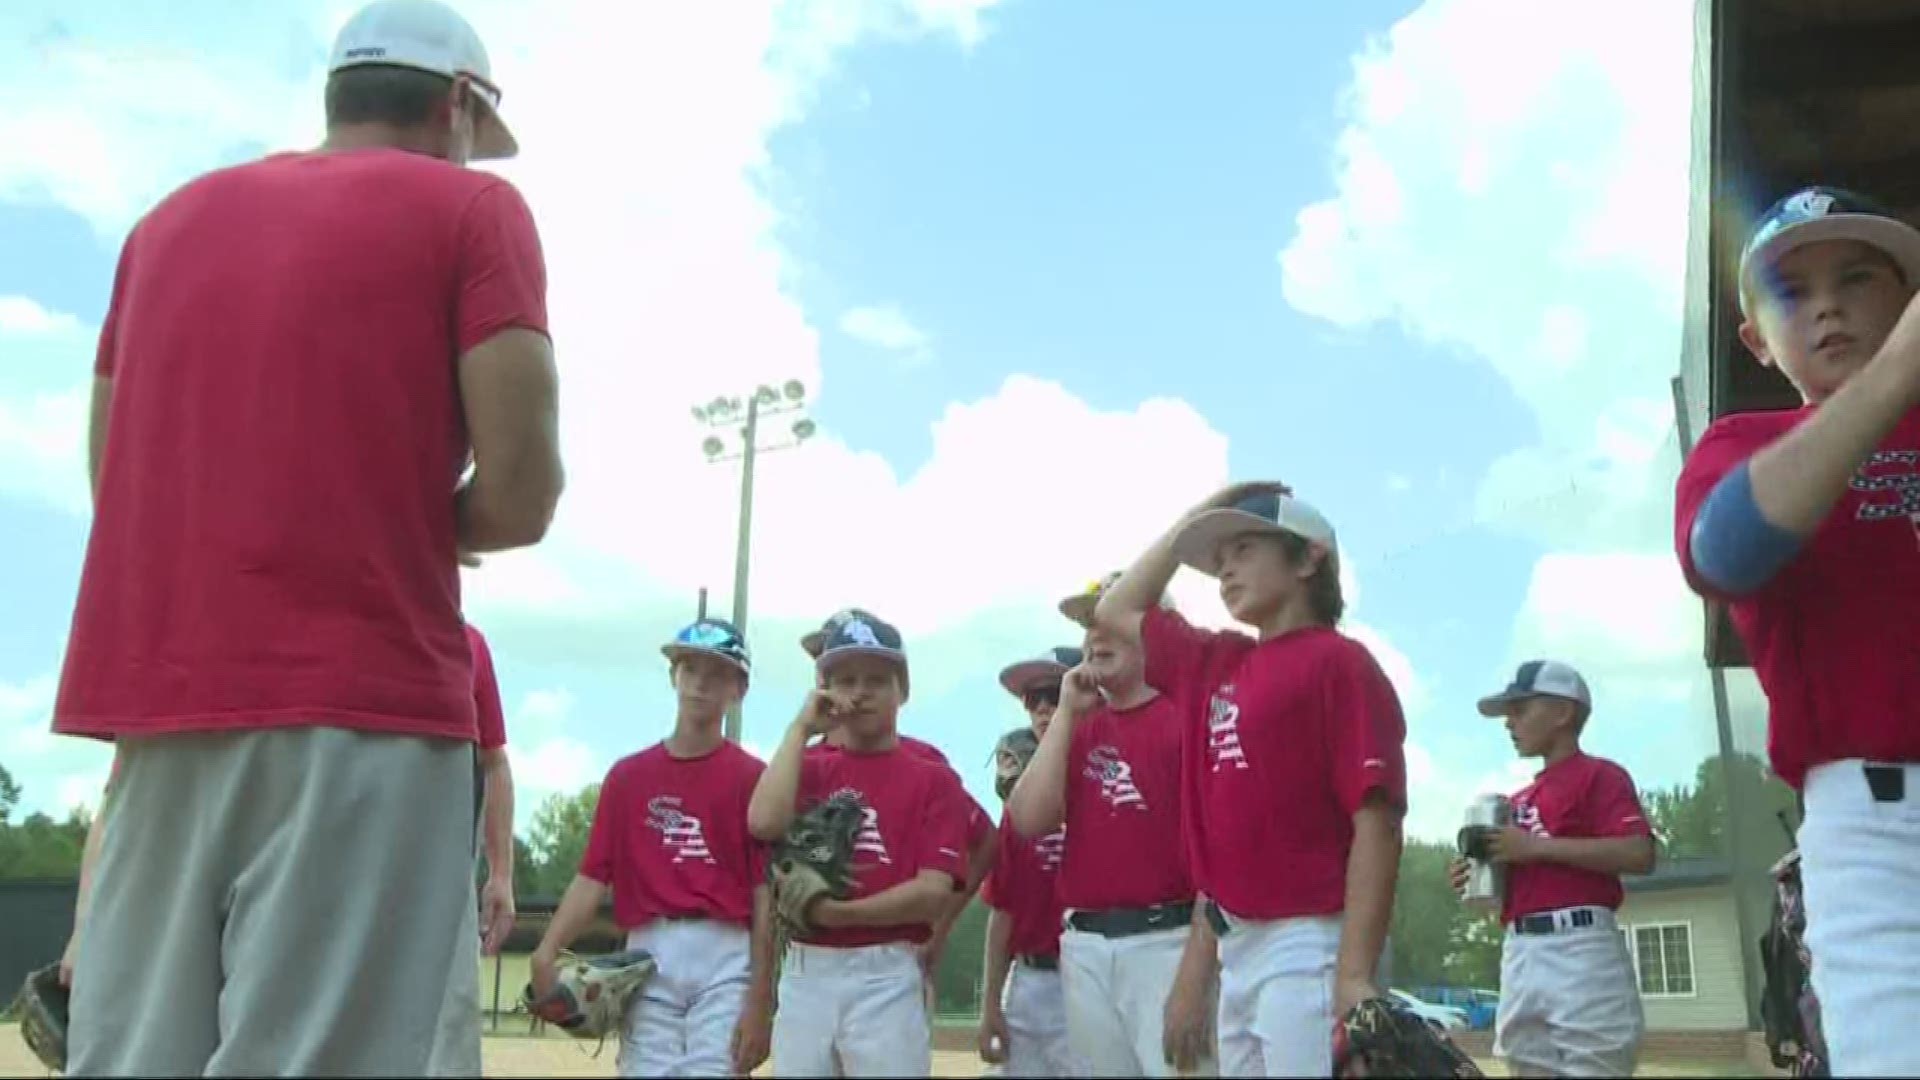 This weekend, the SBA Futures 10U baseball team is defending its title at the USSSA Elite World Series.